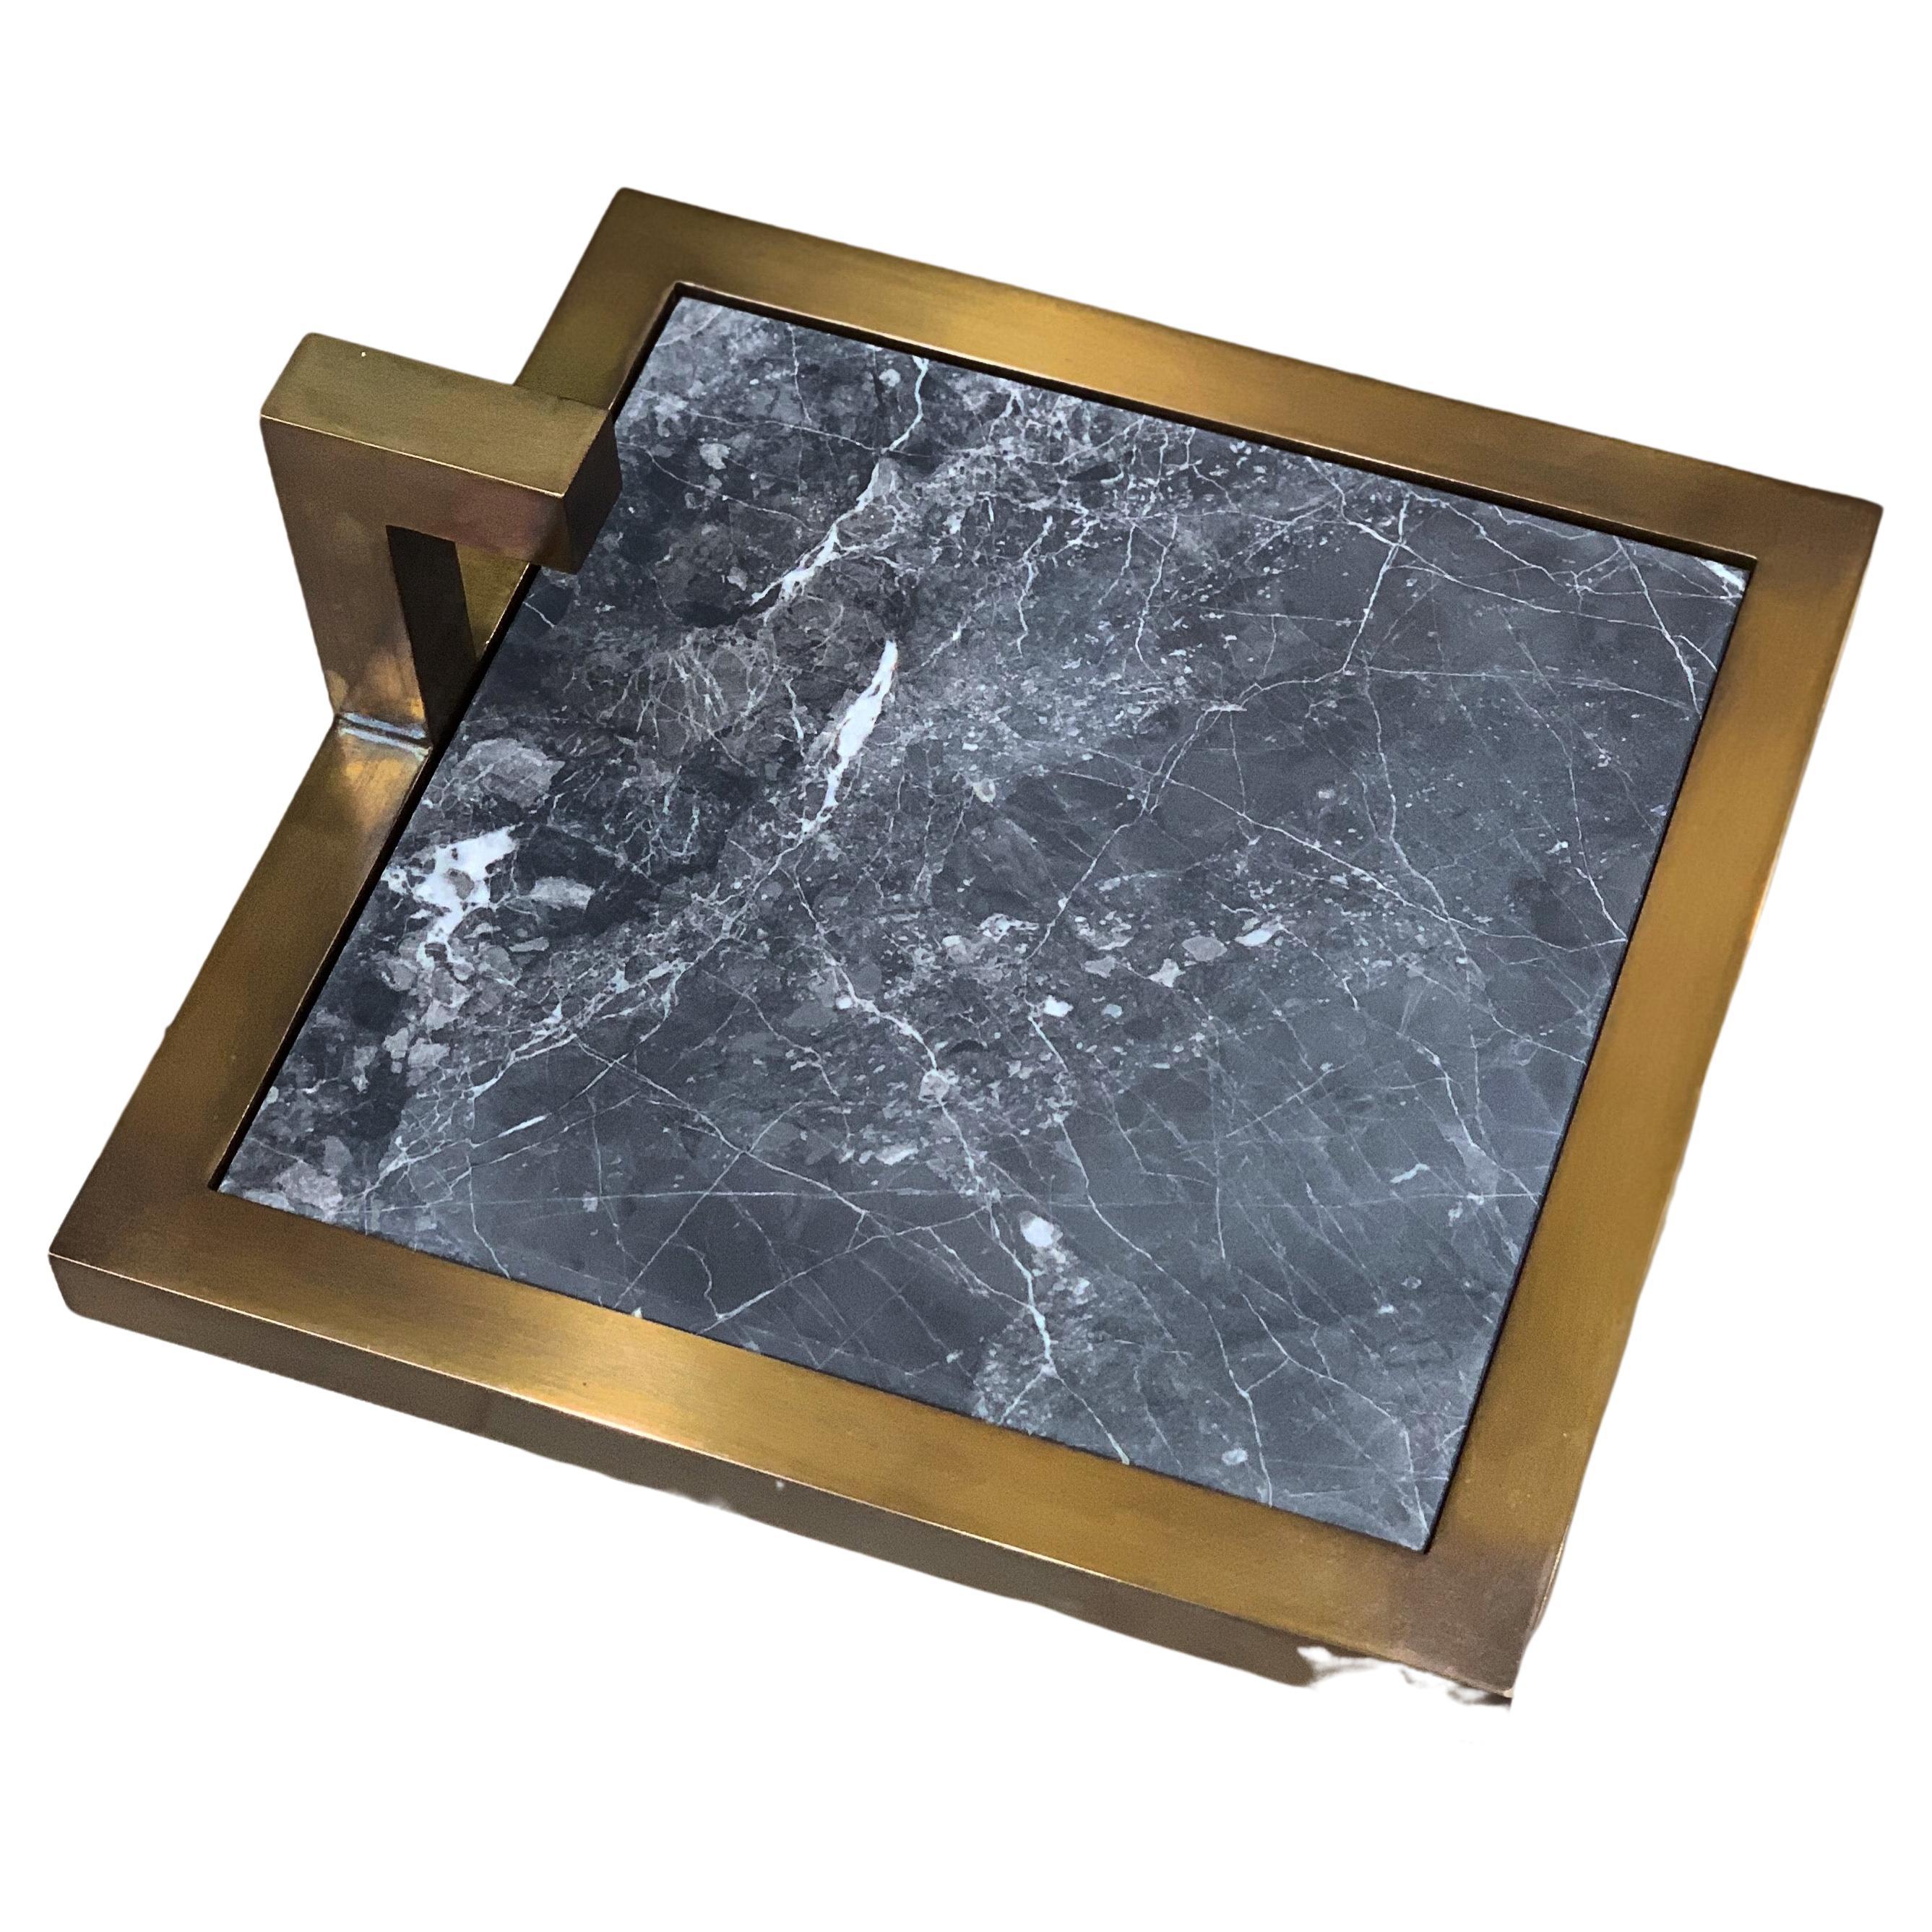 Its sleek dimensions of 25(w) x 25(d) x 68(h) cm the Bronx Table made of real brass with an antique finish make it the perfect addition to any space that needs a touch of urban sophistication.  Choose from our sleek selection of metals and range of